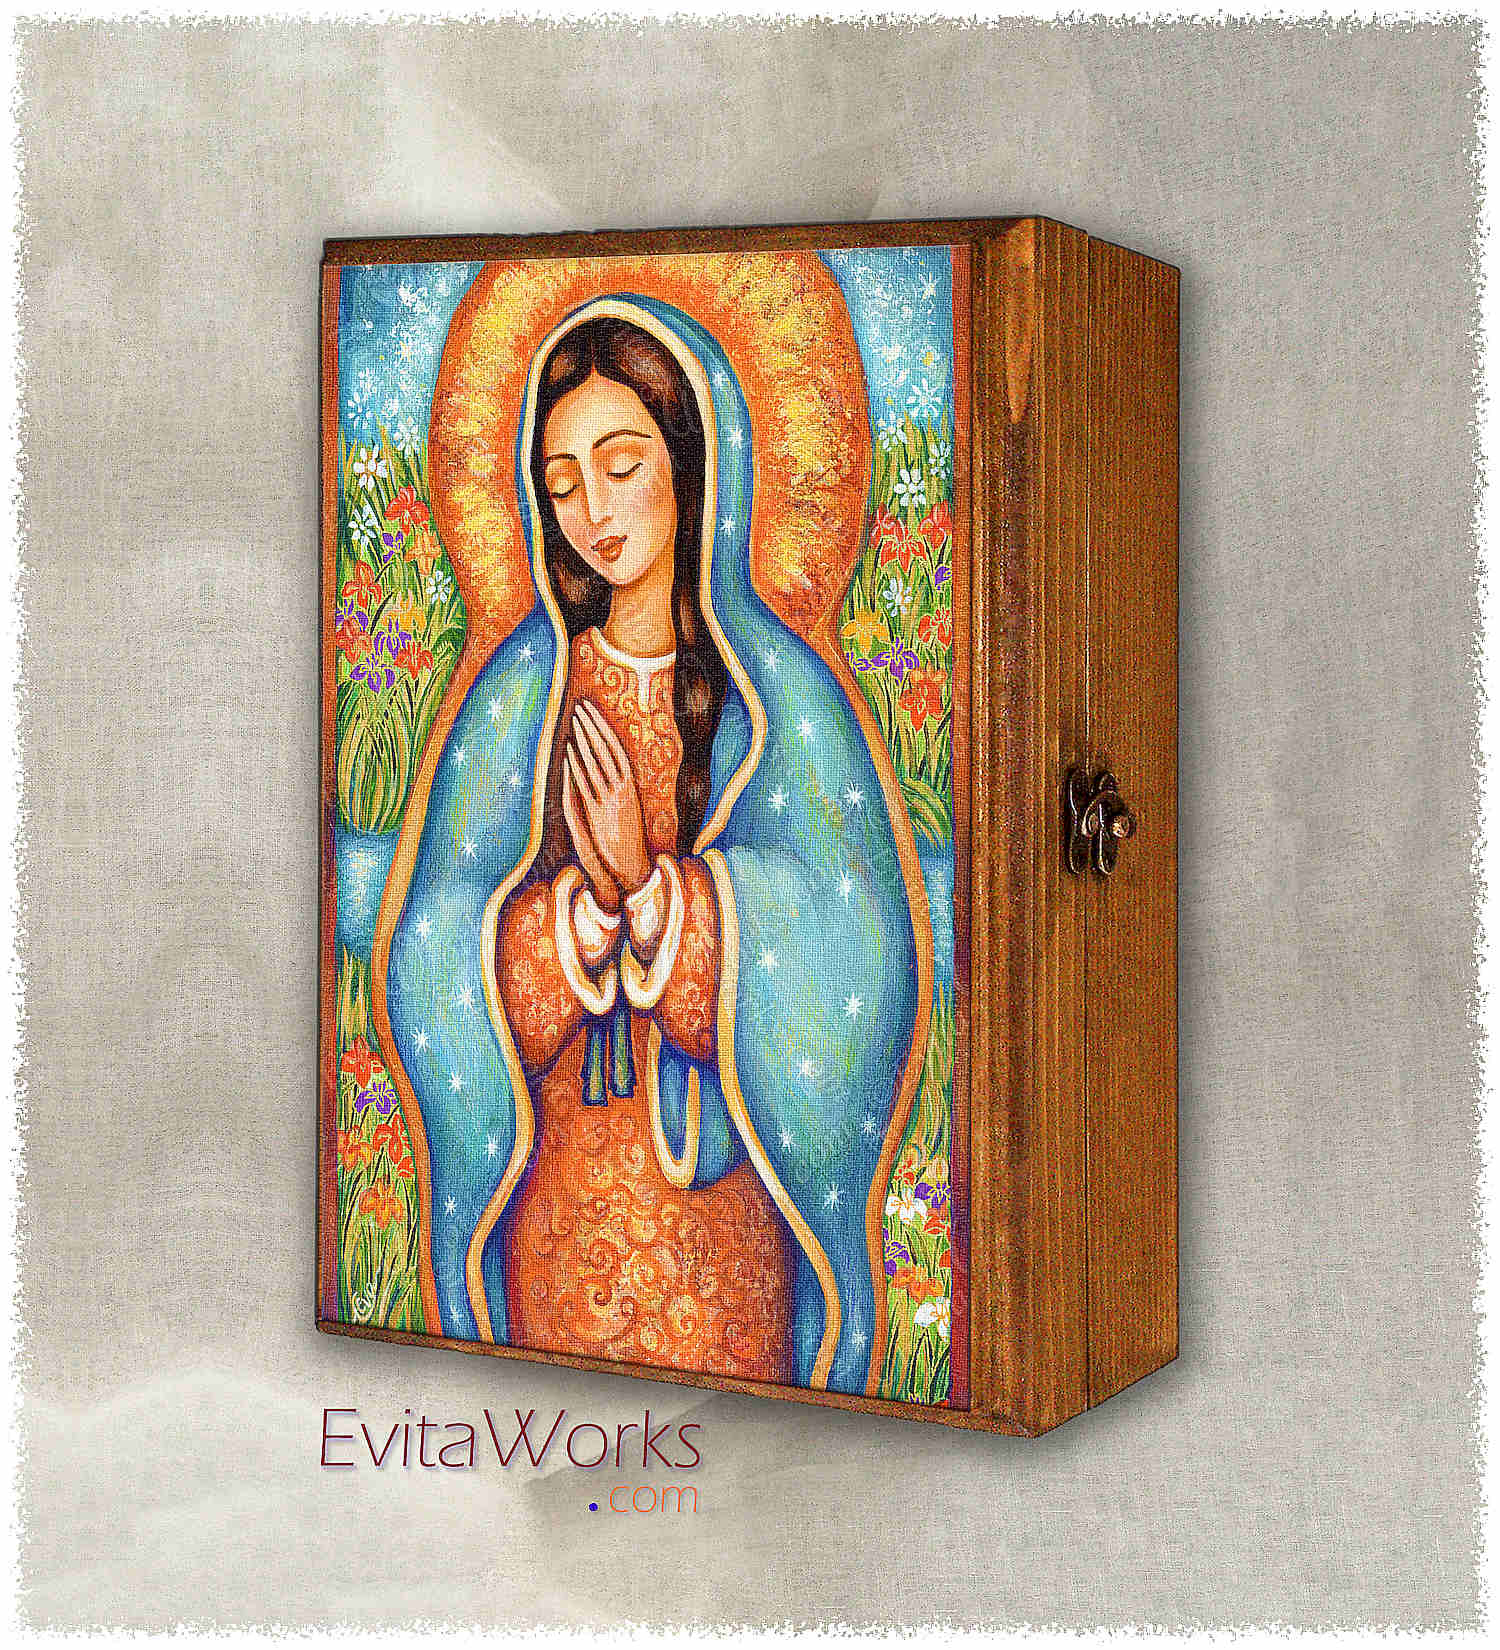 Hit to learn about "The Virgin of Guadalupe" on jewelboxes